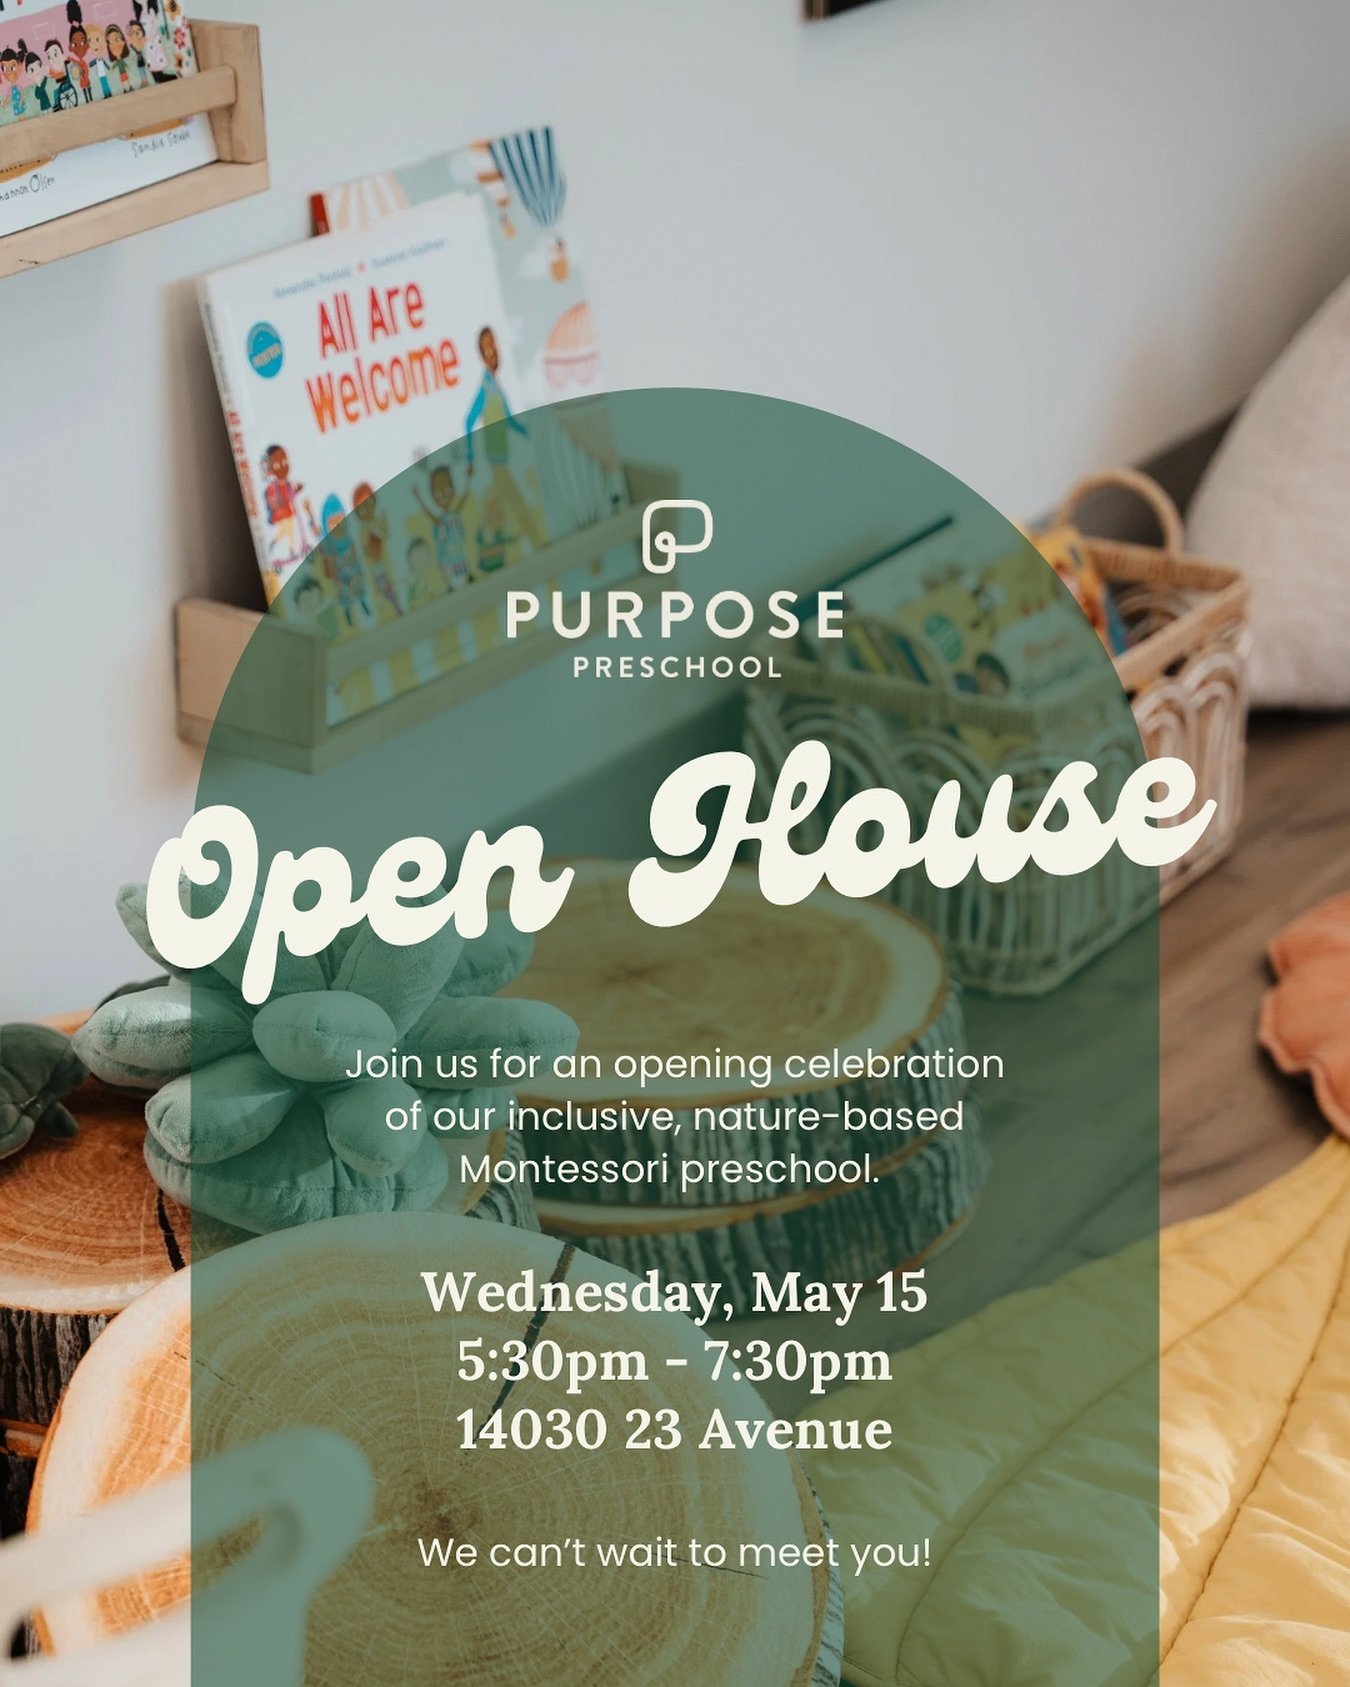 Open House! Join us as we celebrate the opening of our brand new, inclusive, nature-based Montessori preschool 🥳

We are so excited for this opportunity to welcome our community to Purpose Preschool! Whether you&rsquo;re a new family, a familiar fac